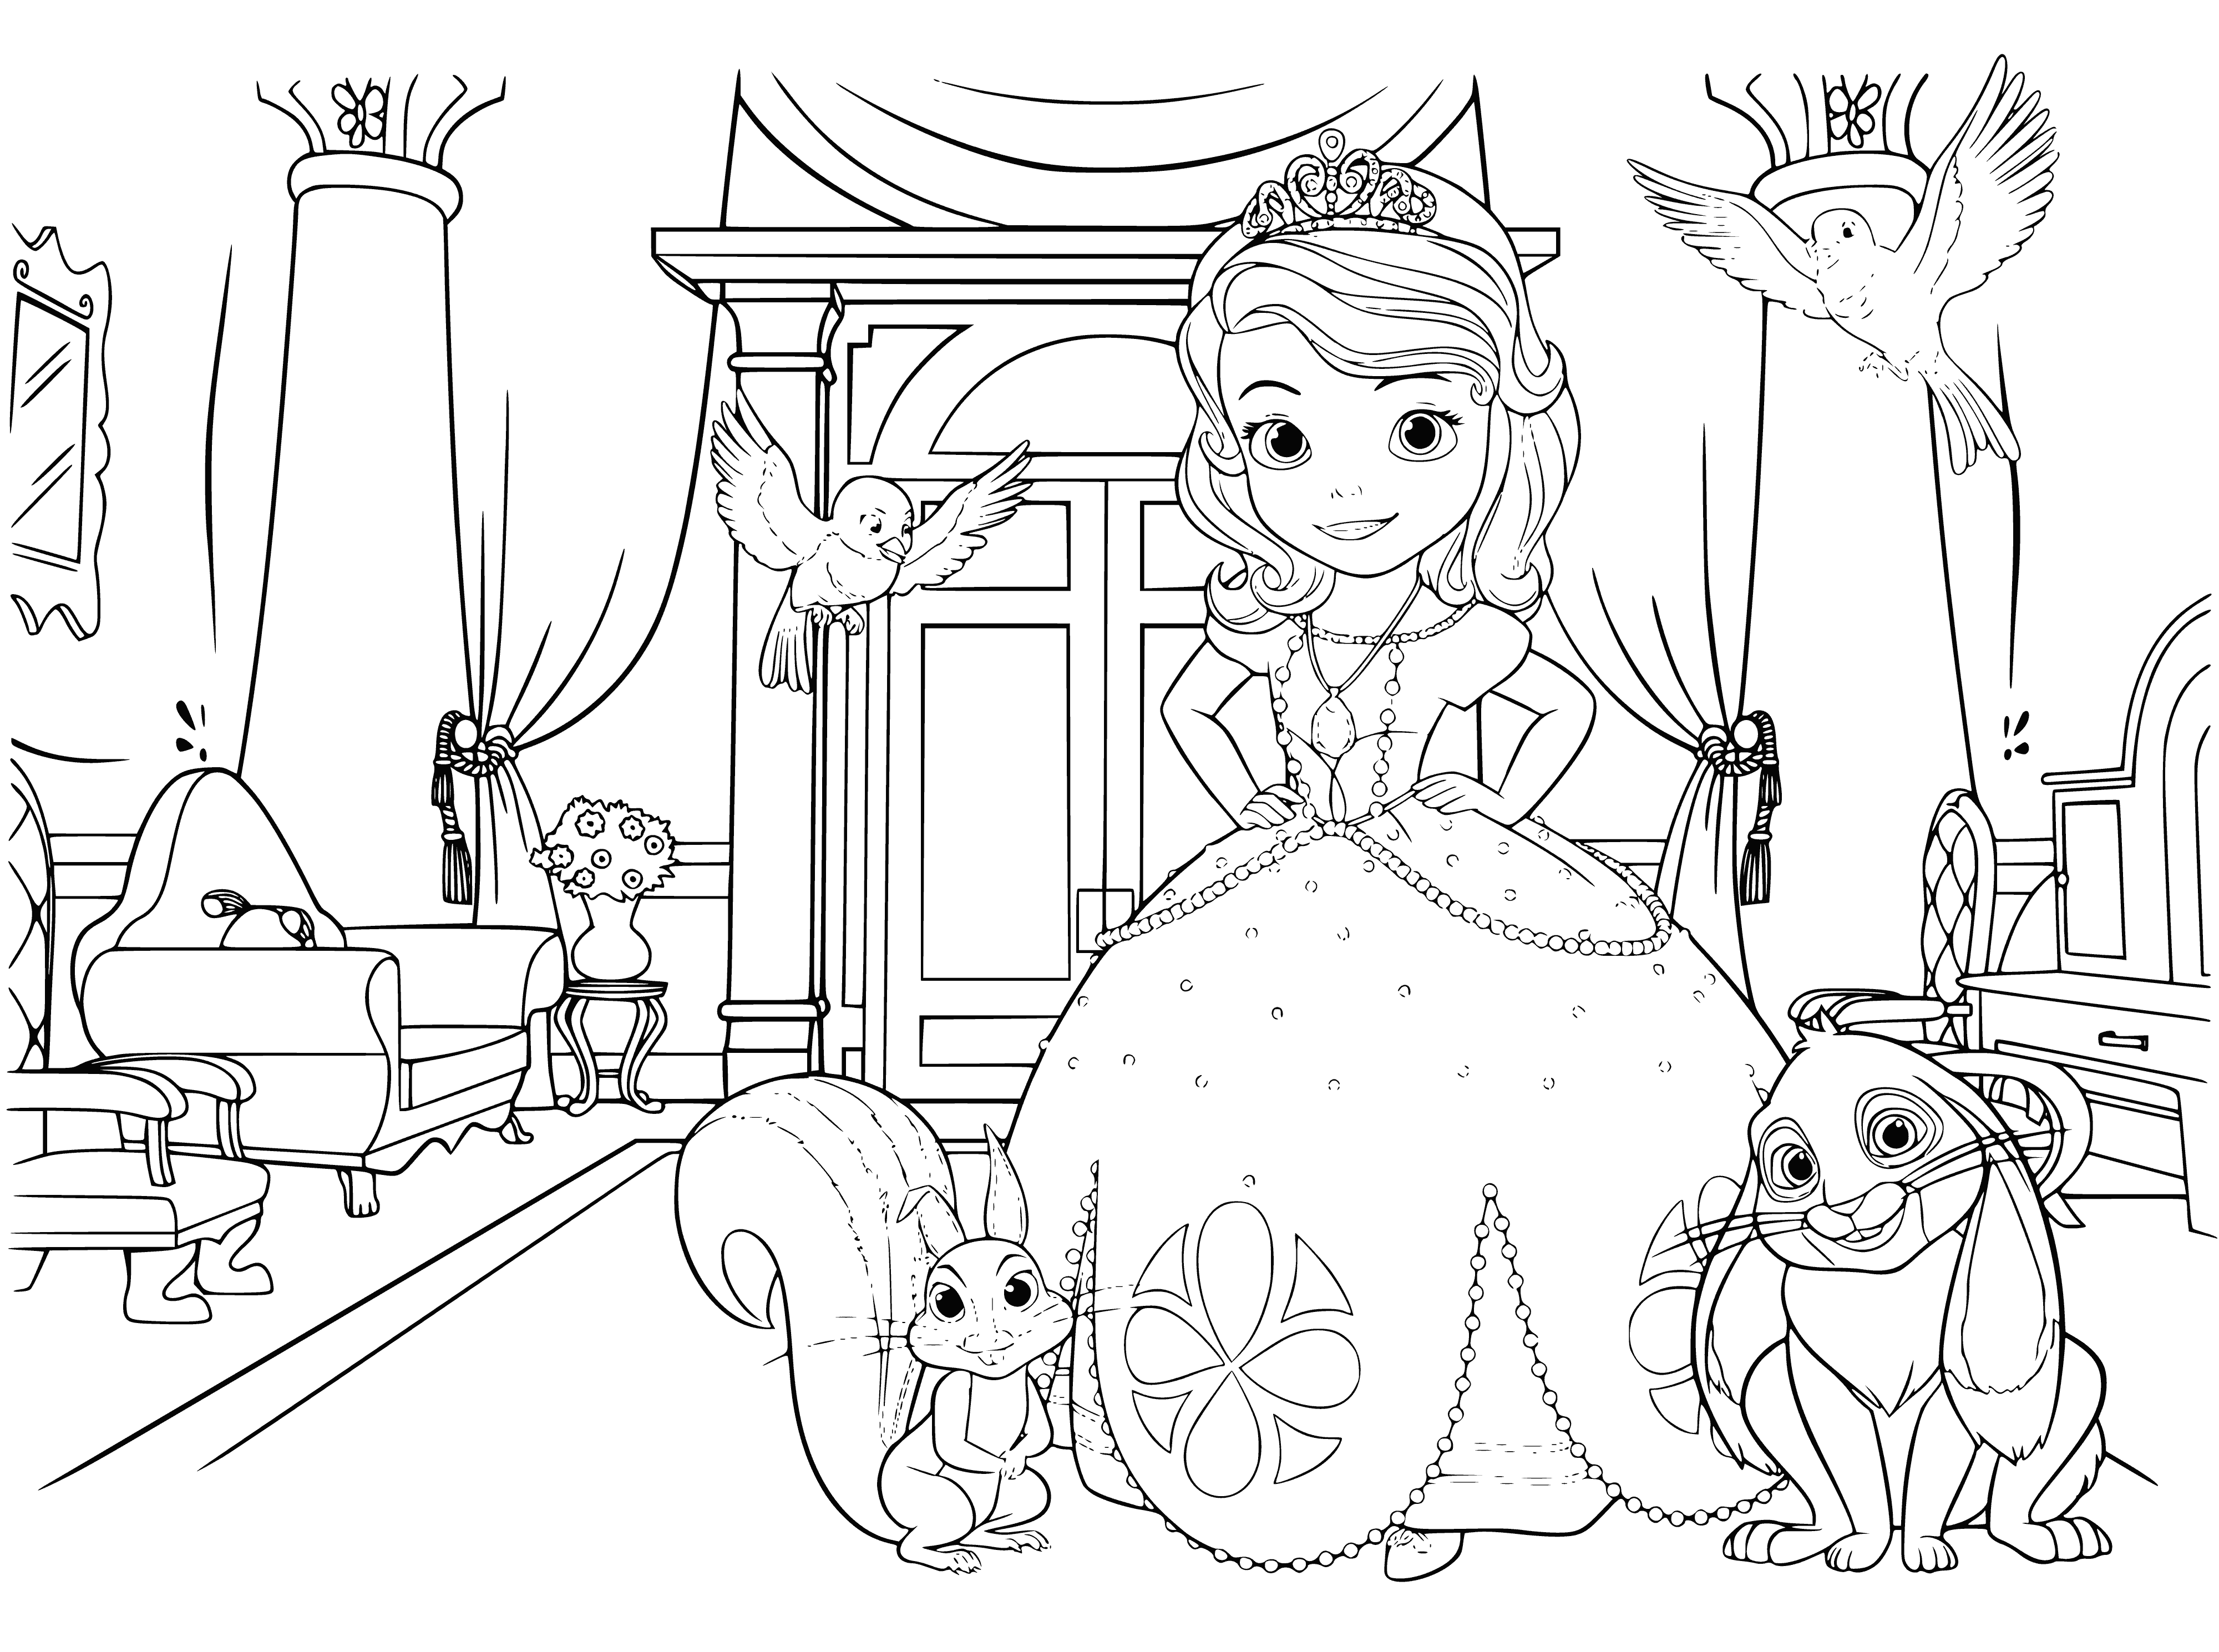 coloring page: Sofia is a royal in a blue dress with a white collar, tiara and looking out the window.